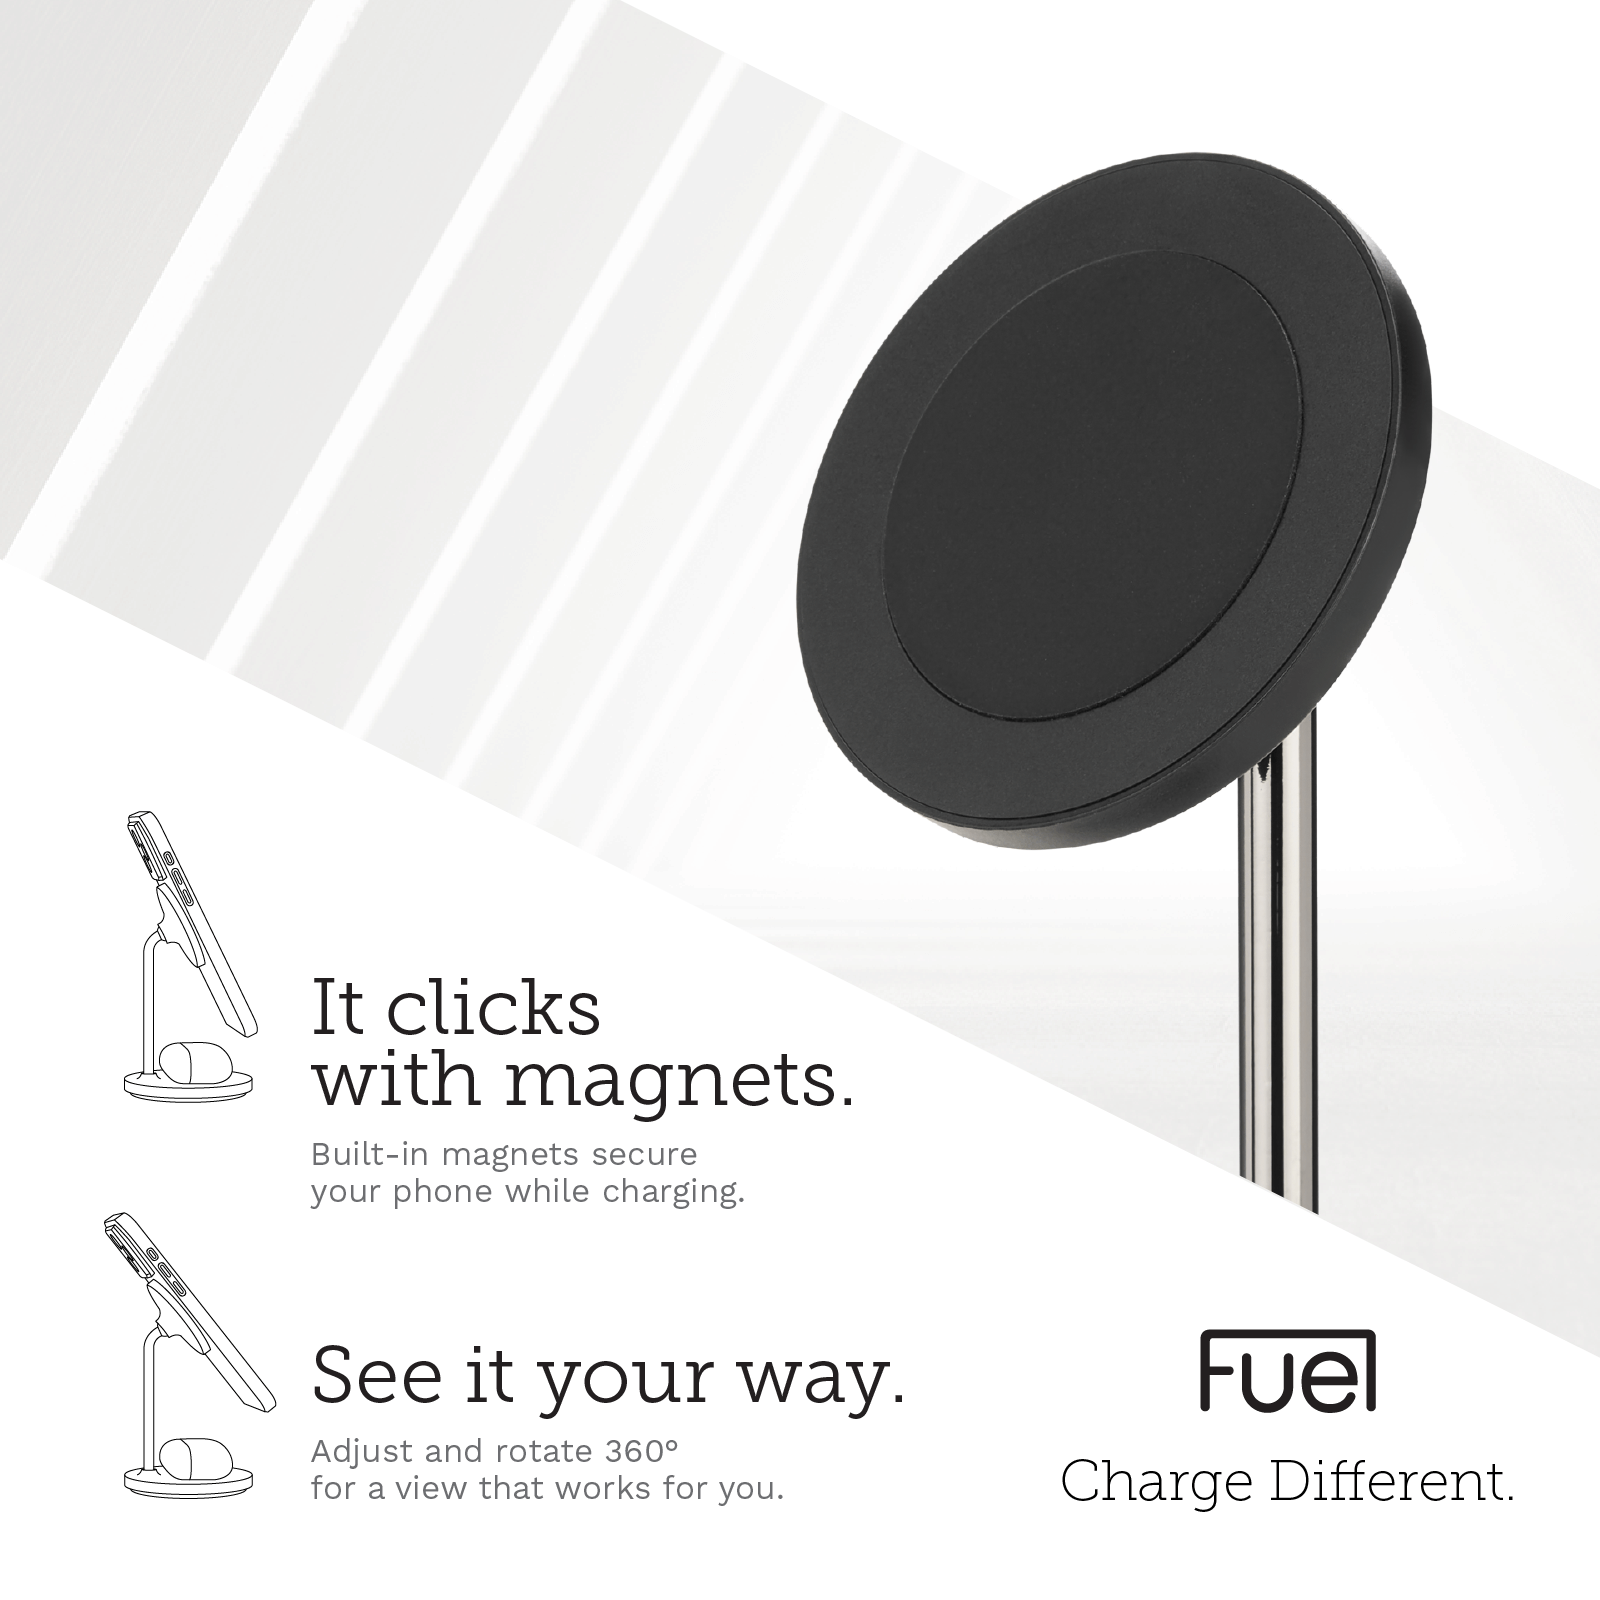 IT CLICKS WITH MAGNETS. BUILT-IN MAGNETS SECURE YOUR PHONE WHILE CHARGING. SEE IT YOUR WAY. ADJUST AND ROTATE 360 DEGREES FR A VIEW THAT WORKS FOR YOU.